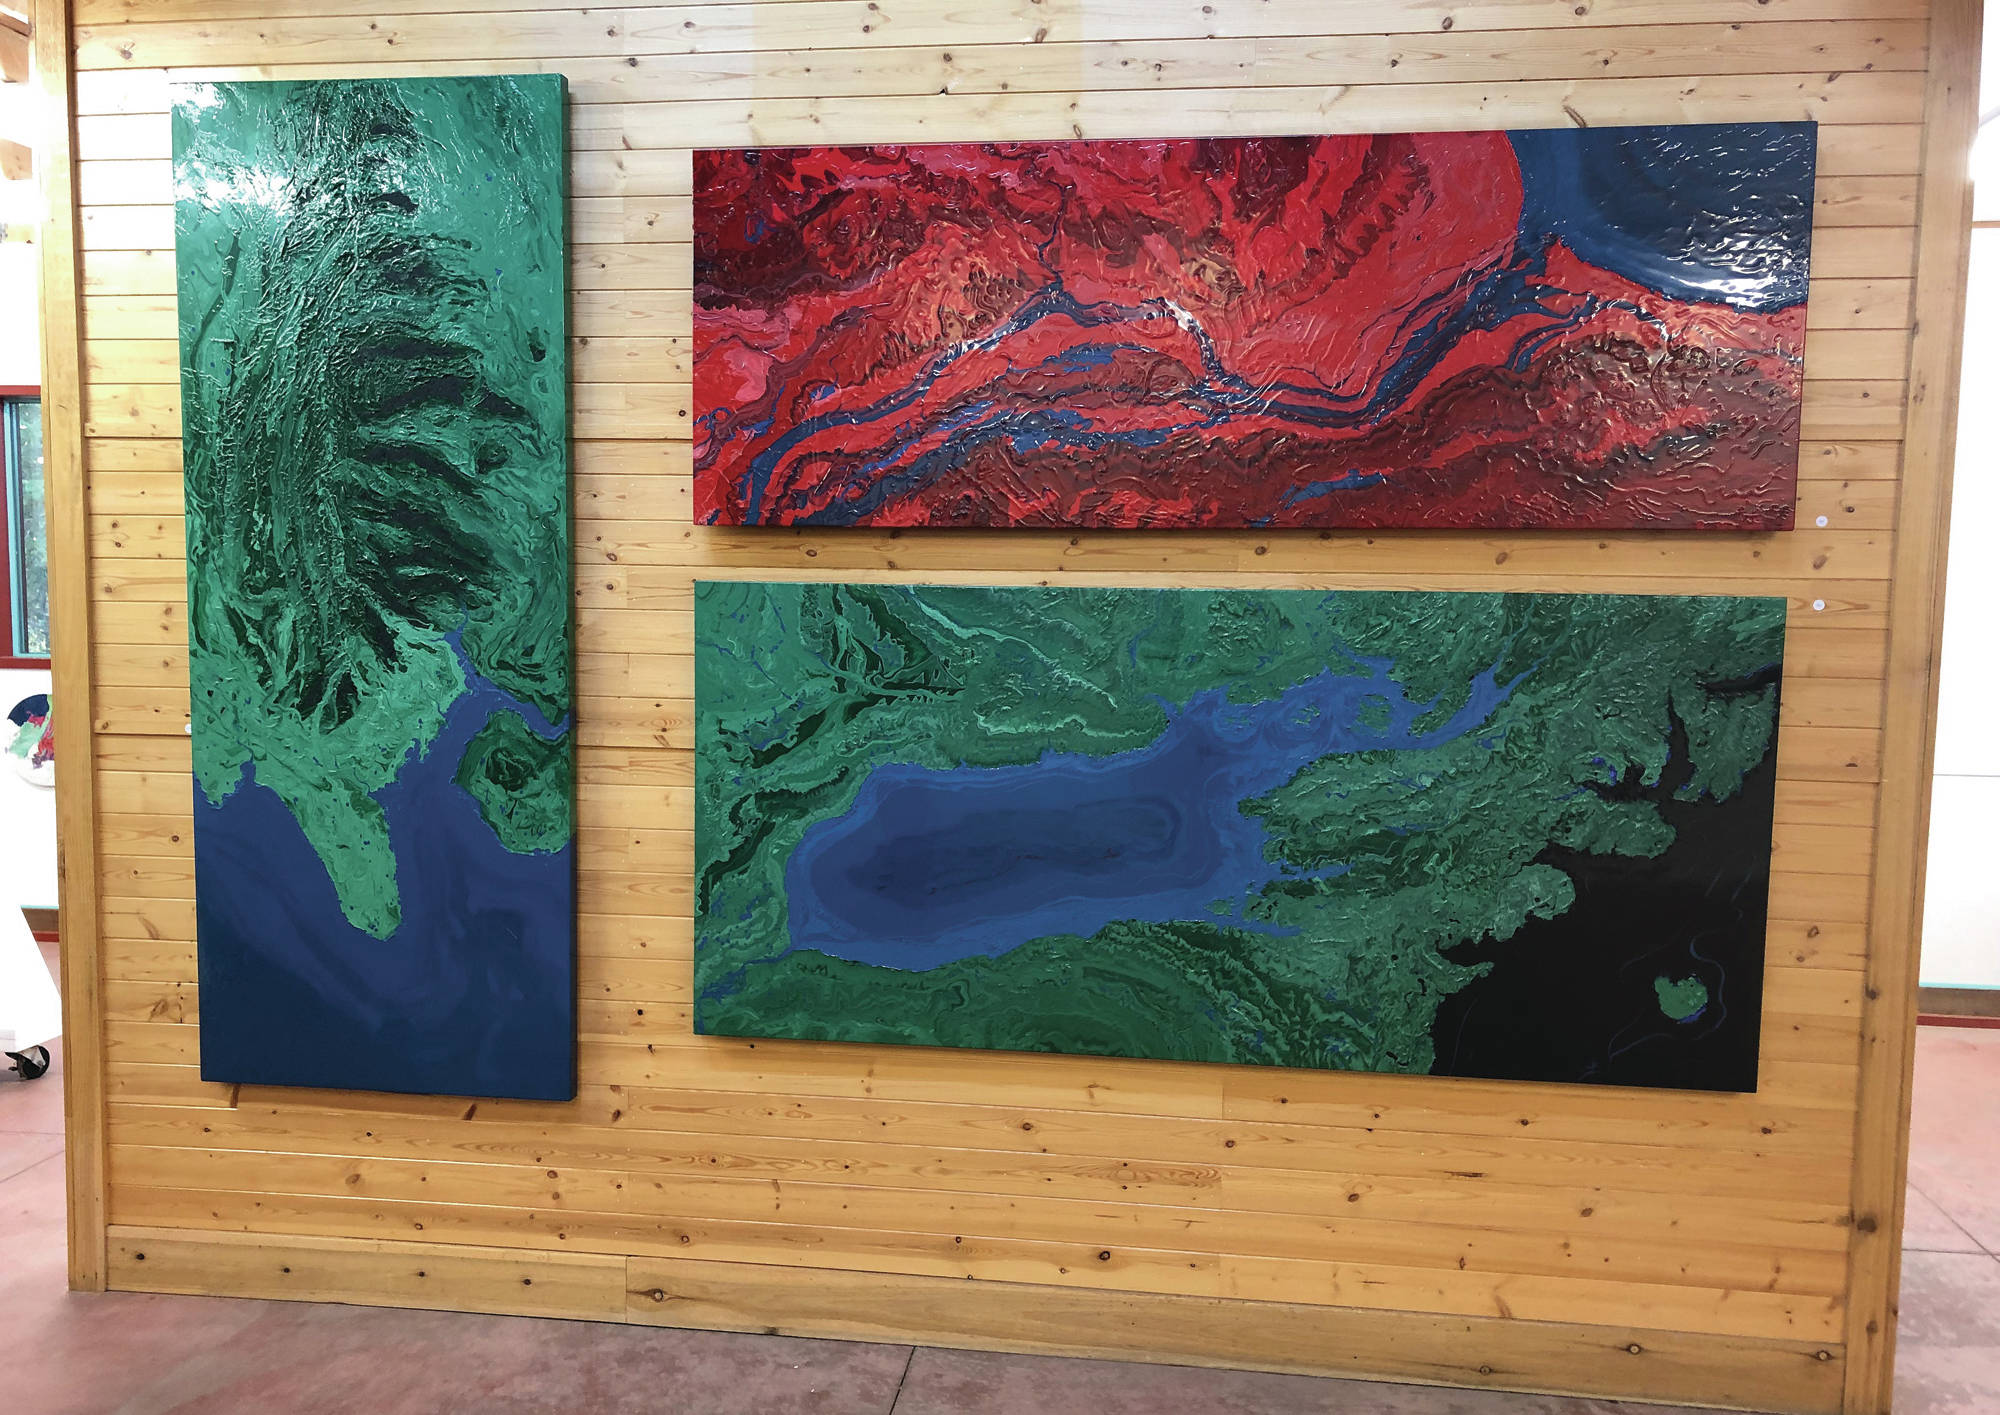 Paintings by Spelman Evans Downer sit on display at the Ecotopia North Painting Exhibition at the Gallery Turquoise North at mile 49.5 of the Sterling Highway in Cooper Landing. (Photo provided by Sara Frantz)